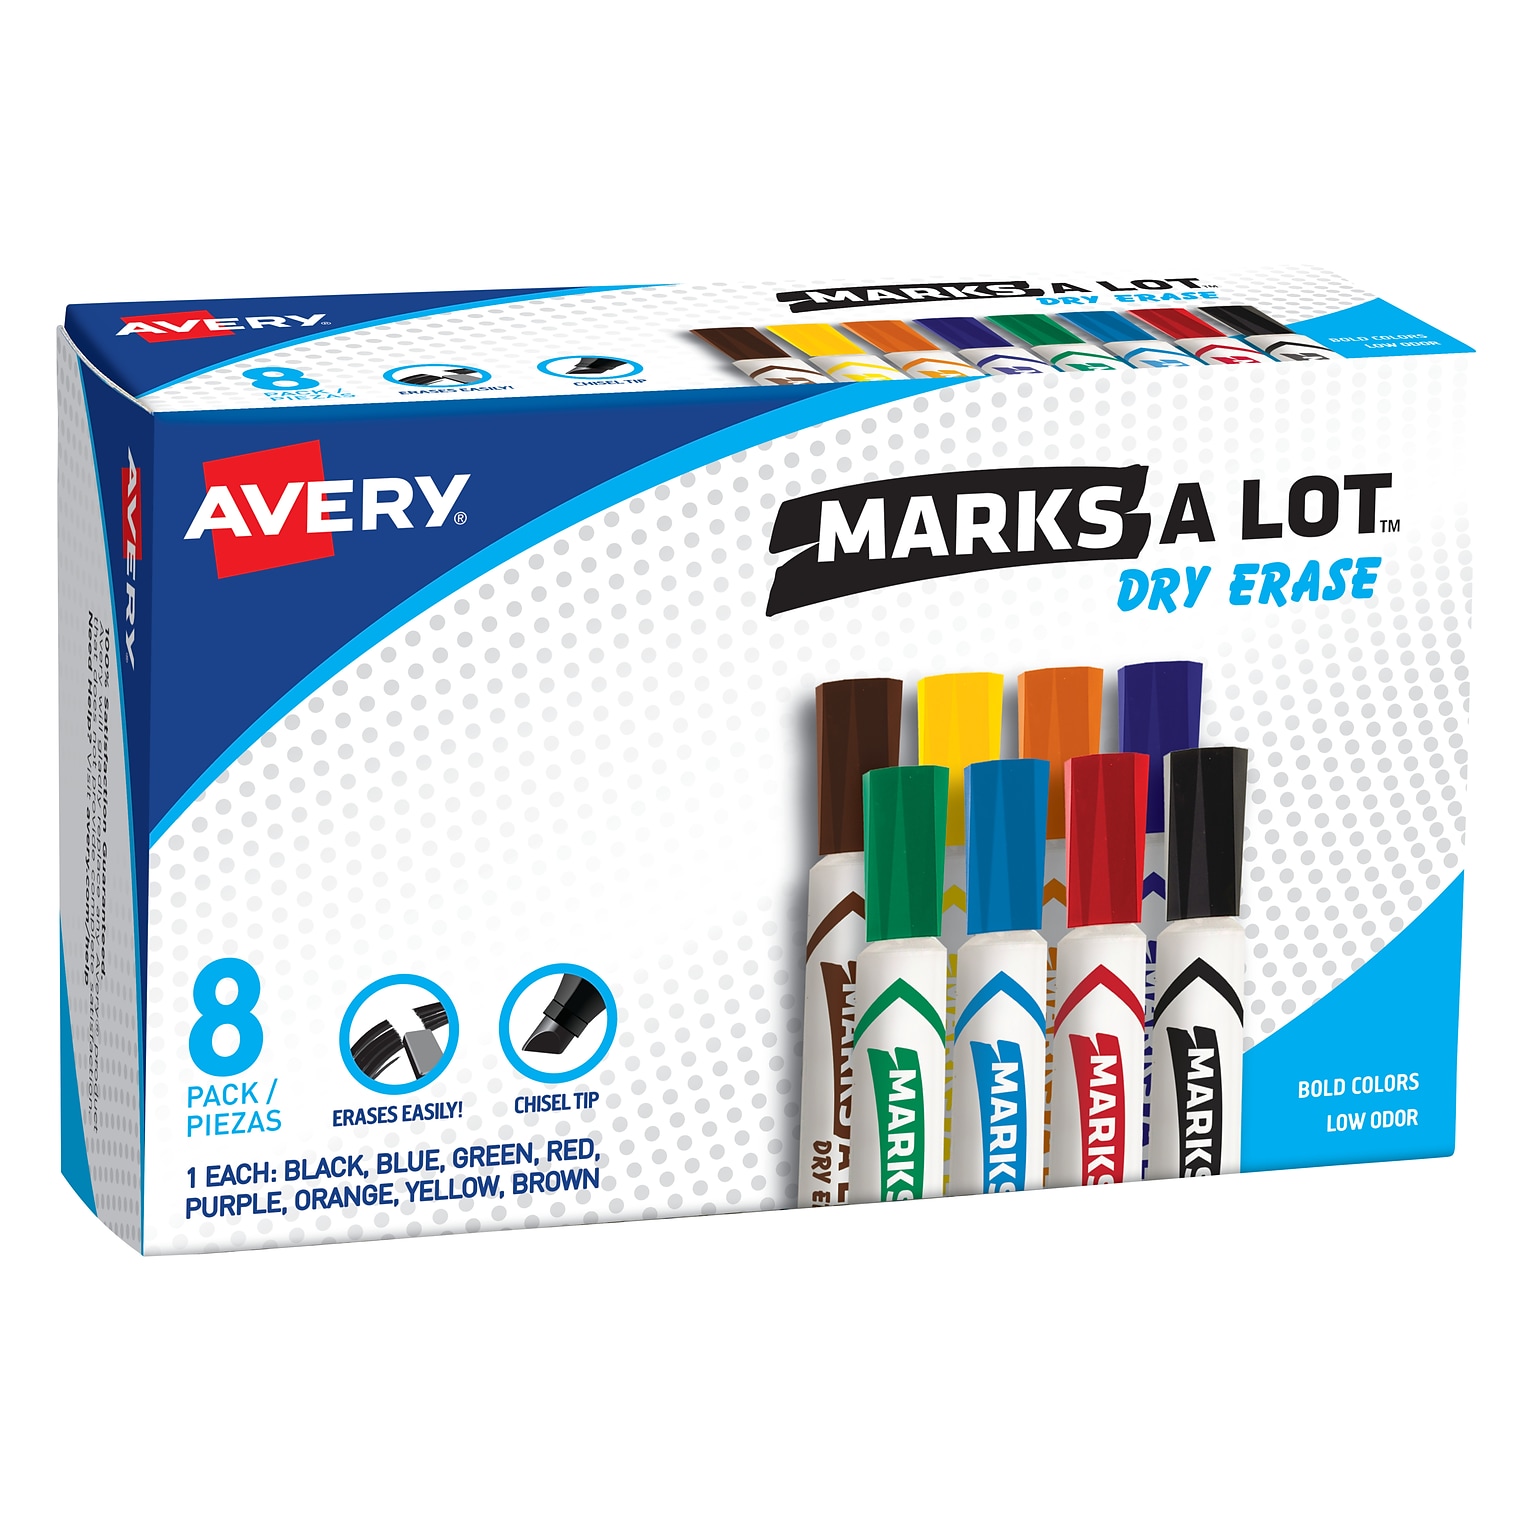 Avery Marks-A-Lot Dry Erase Markers, Chisel Tip, Assorted, 8/Pack (24411)